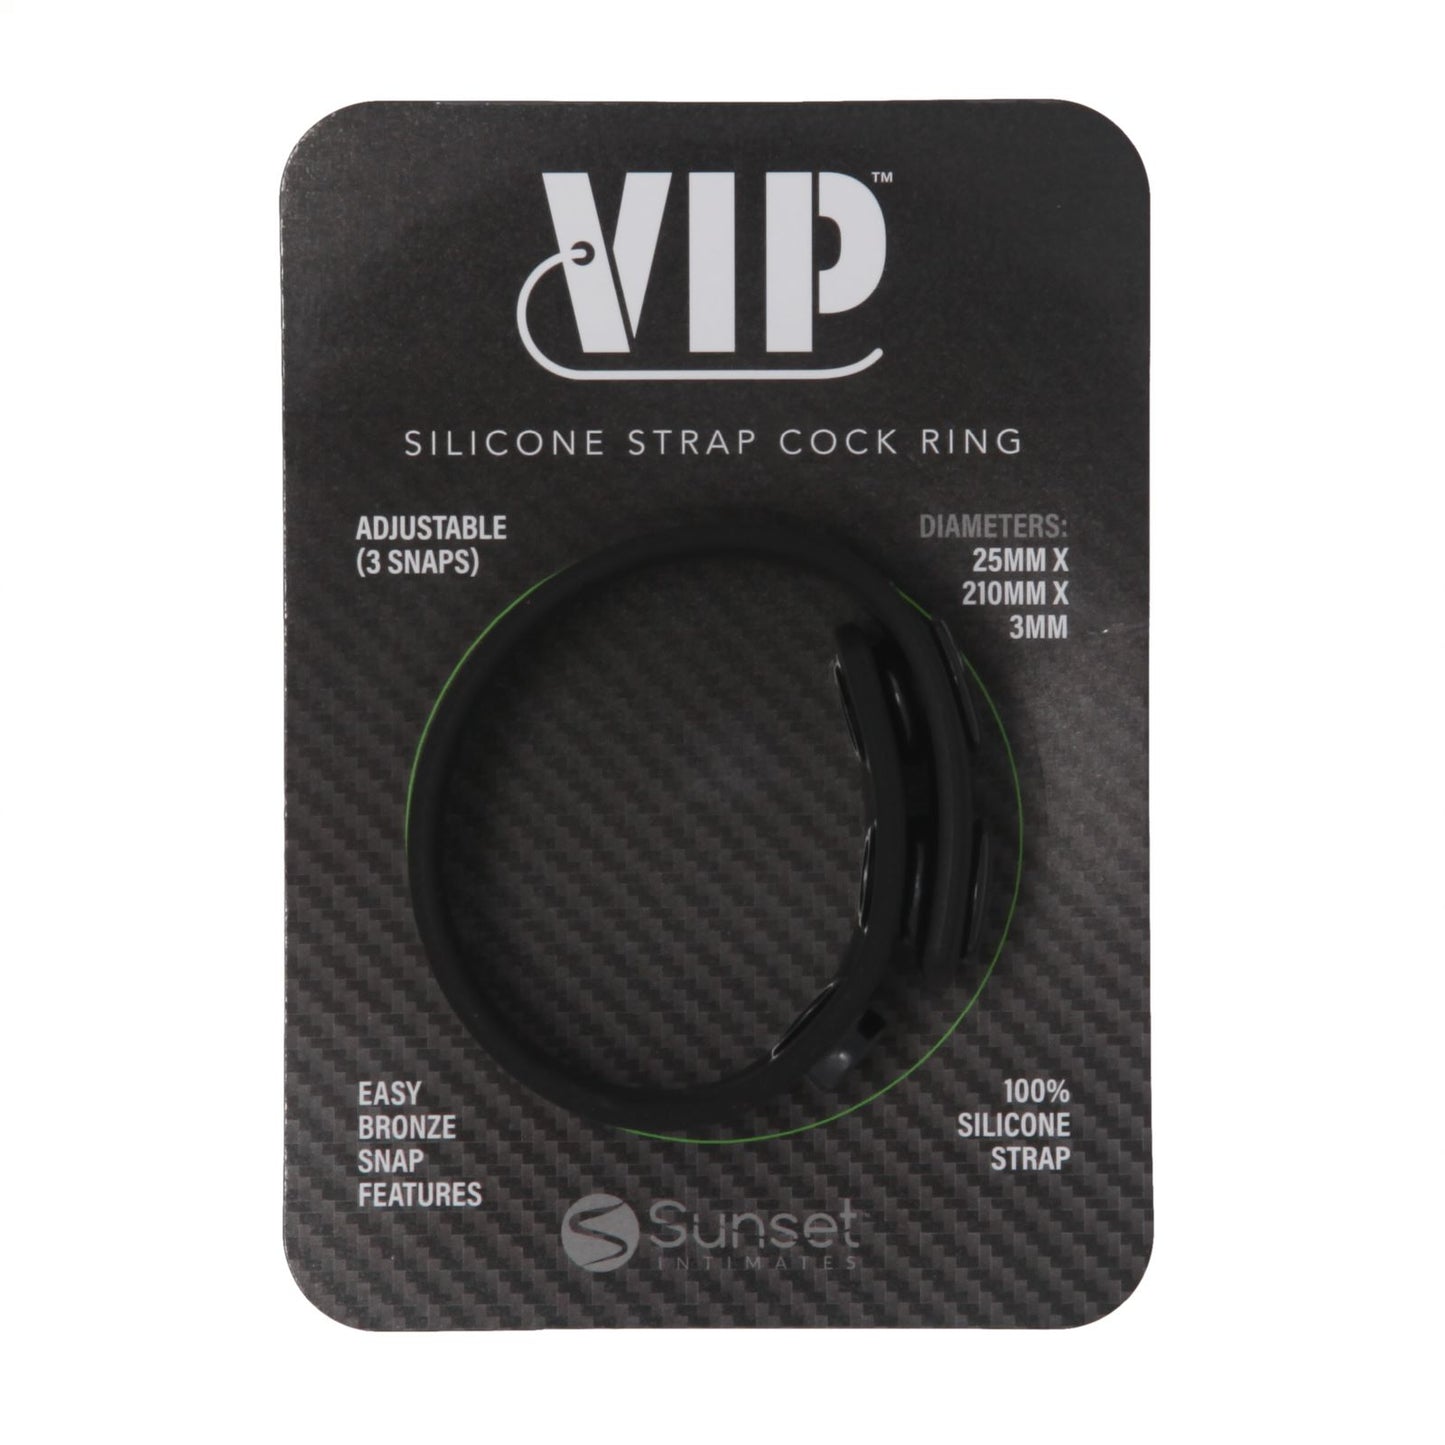 Adjustable Cock Ring